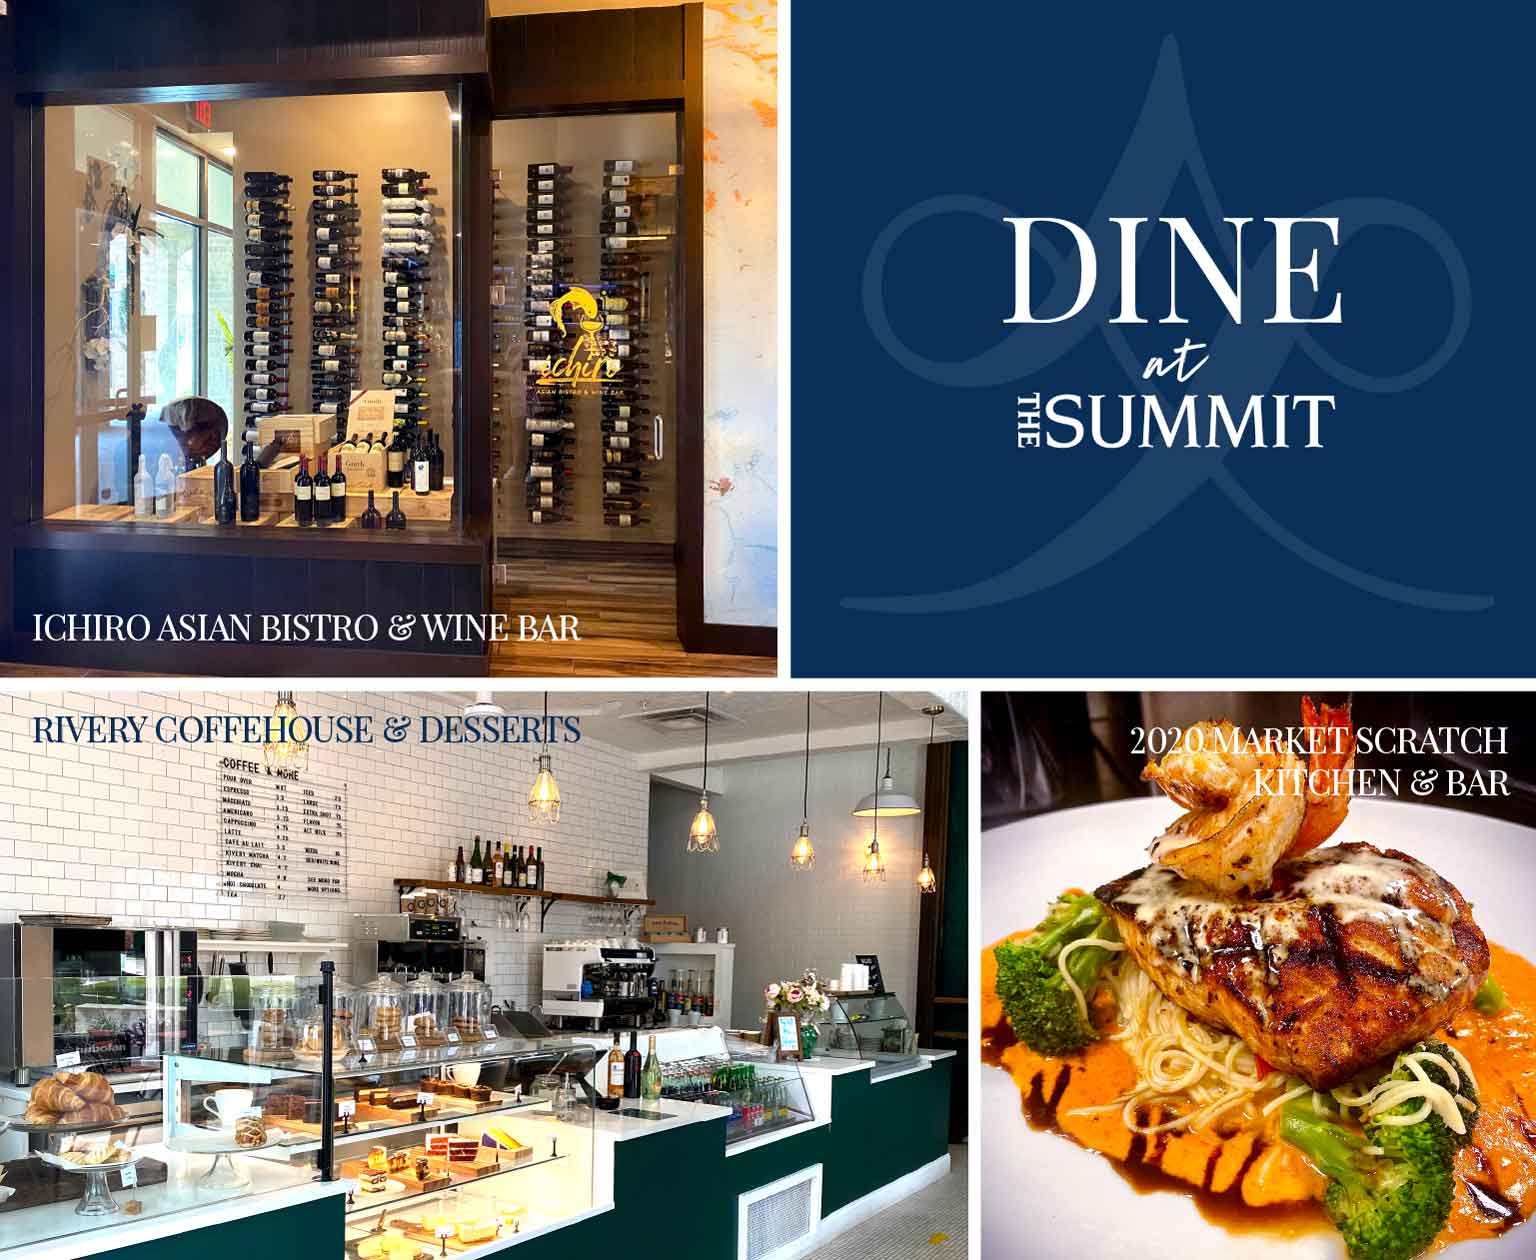 Dine inside and on patios at Rivery Coffeehouse, ichiro Asian Bistro & Wine Bar, 2020 Market Scratch Kitchen & Bar at The Summit at Rivery Park